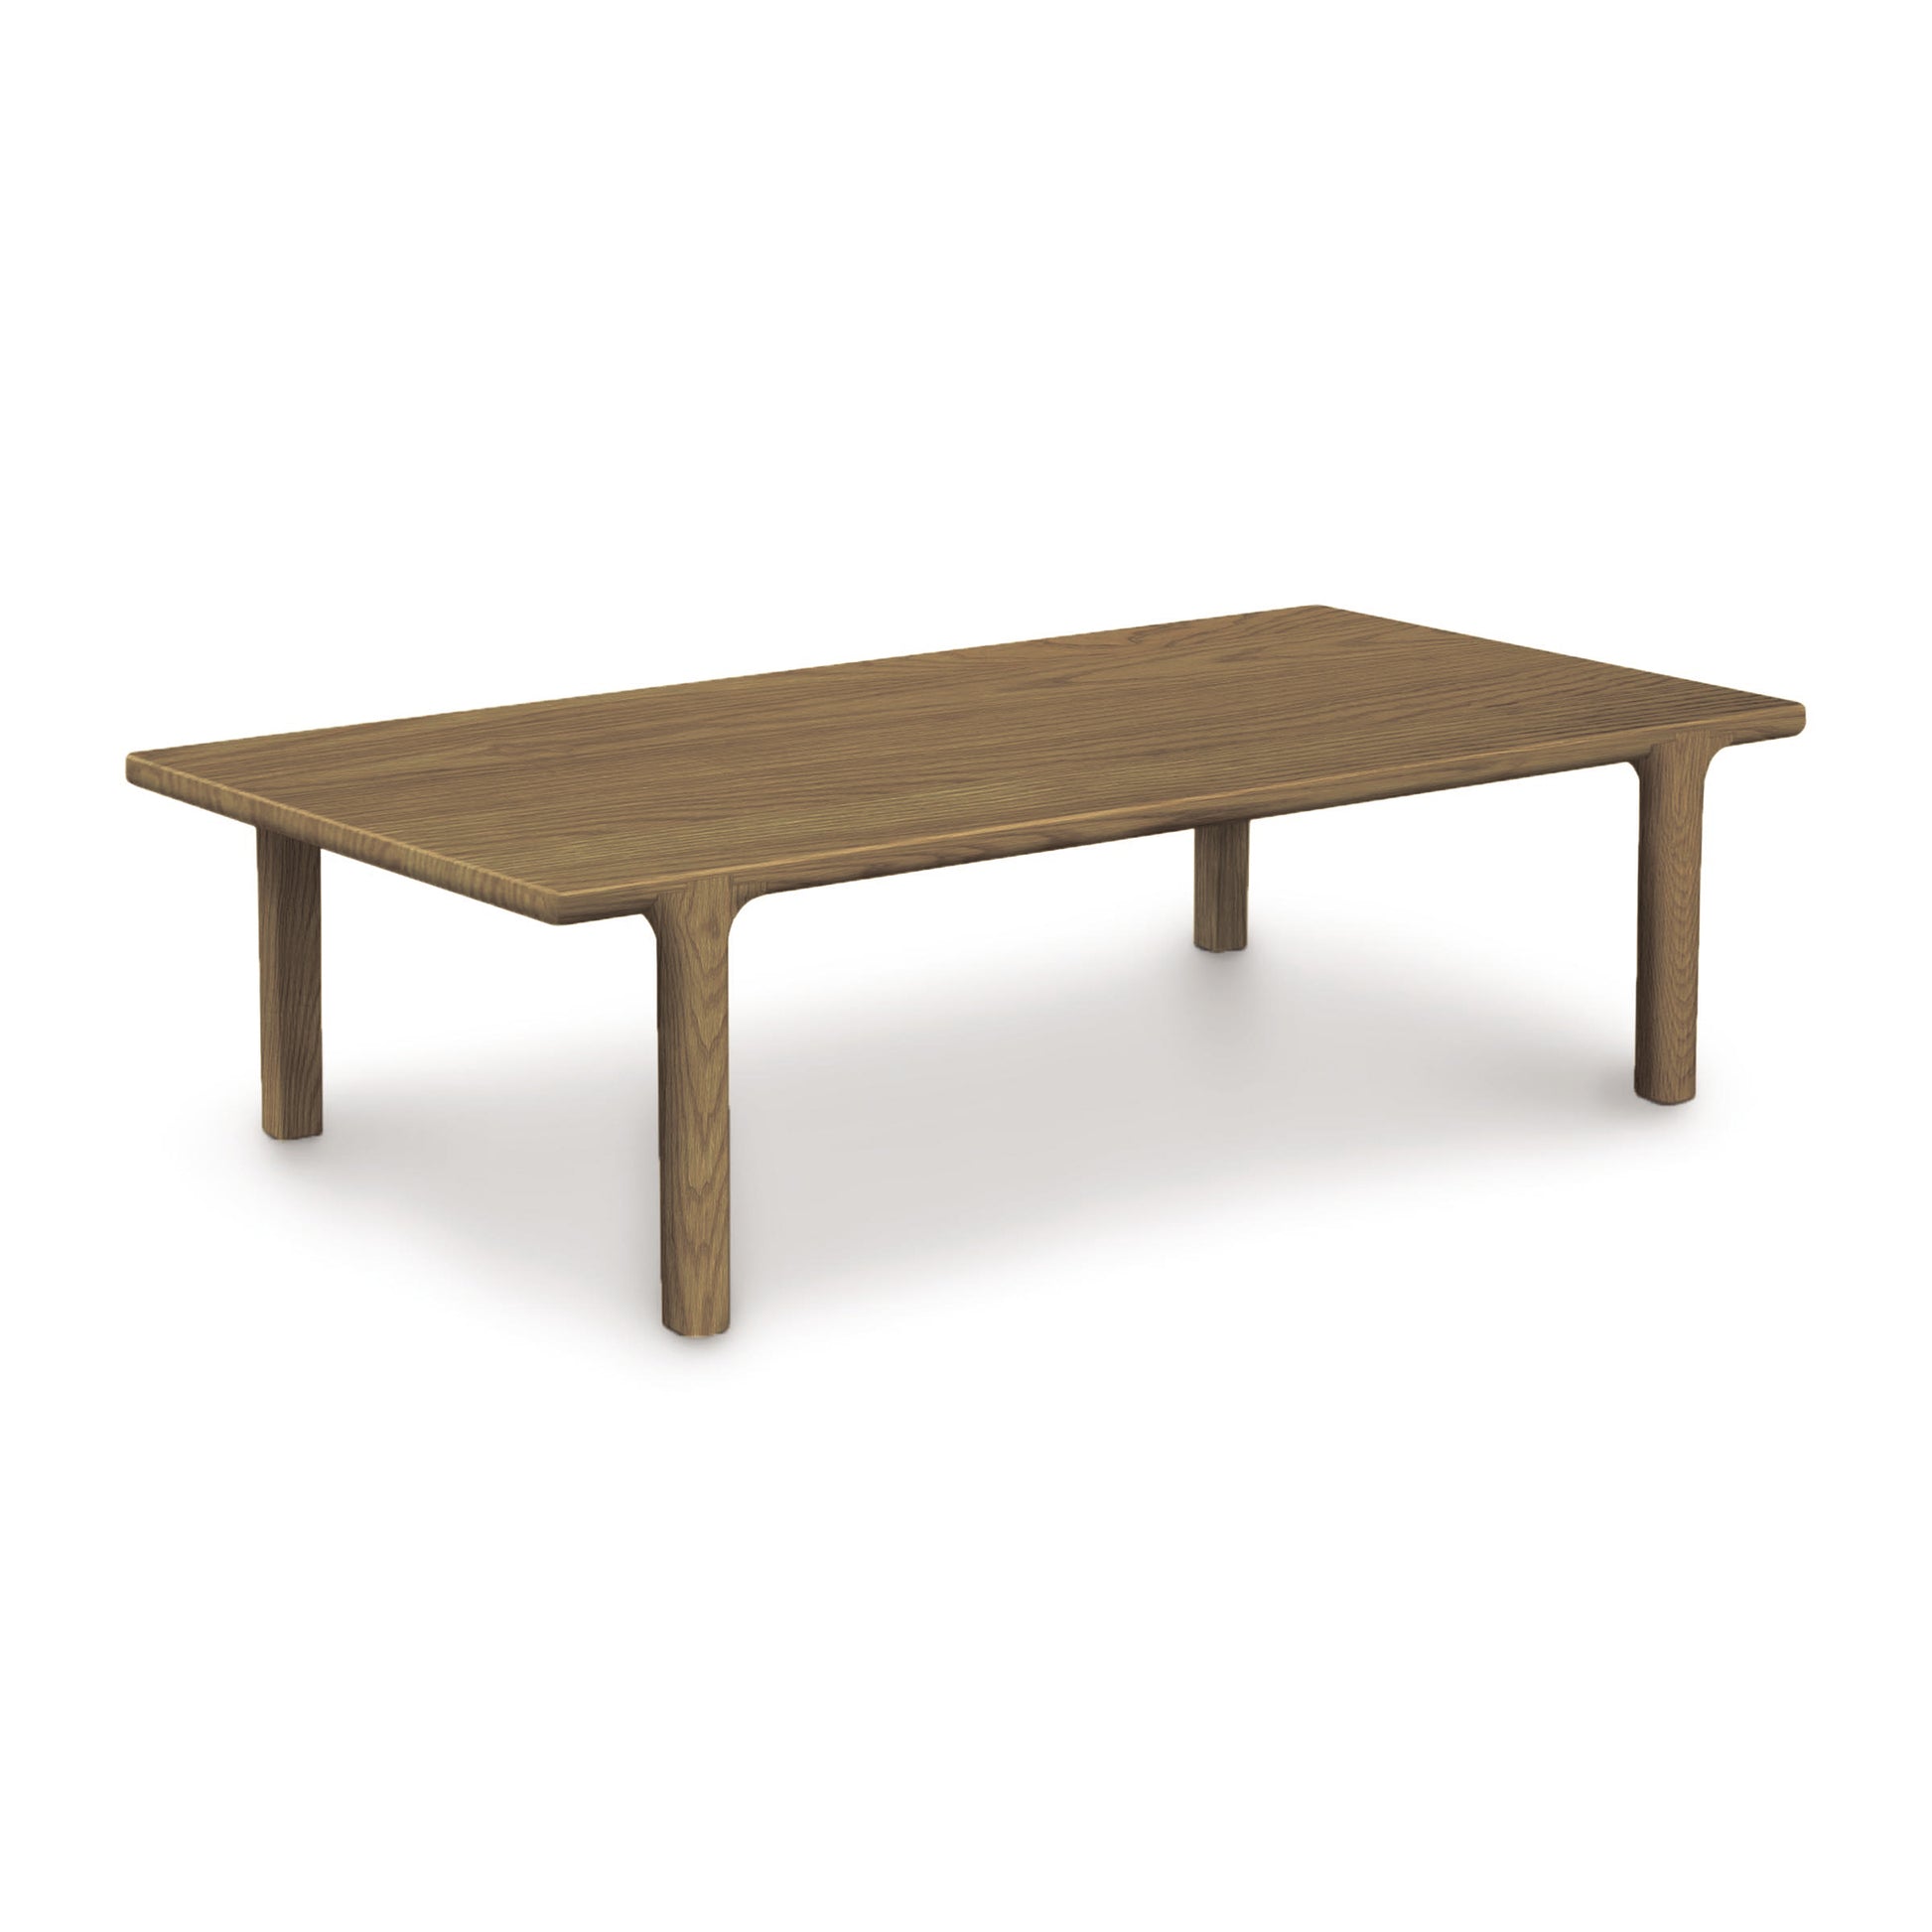 A Copeland Furniture Sierra Rectangular Coffee Table on a white background.